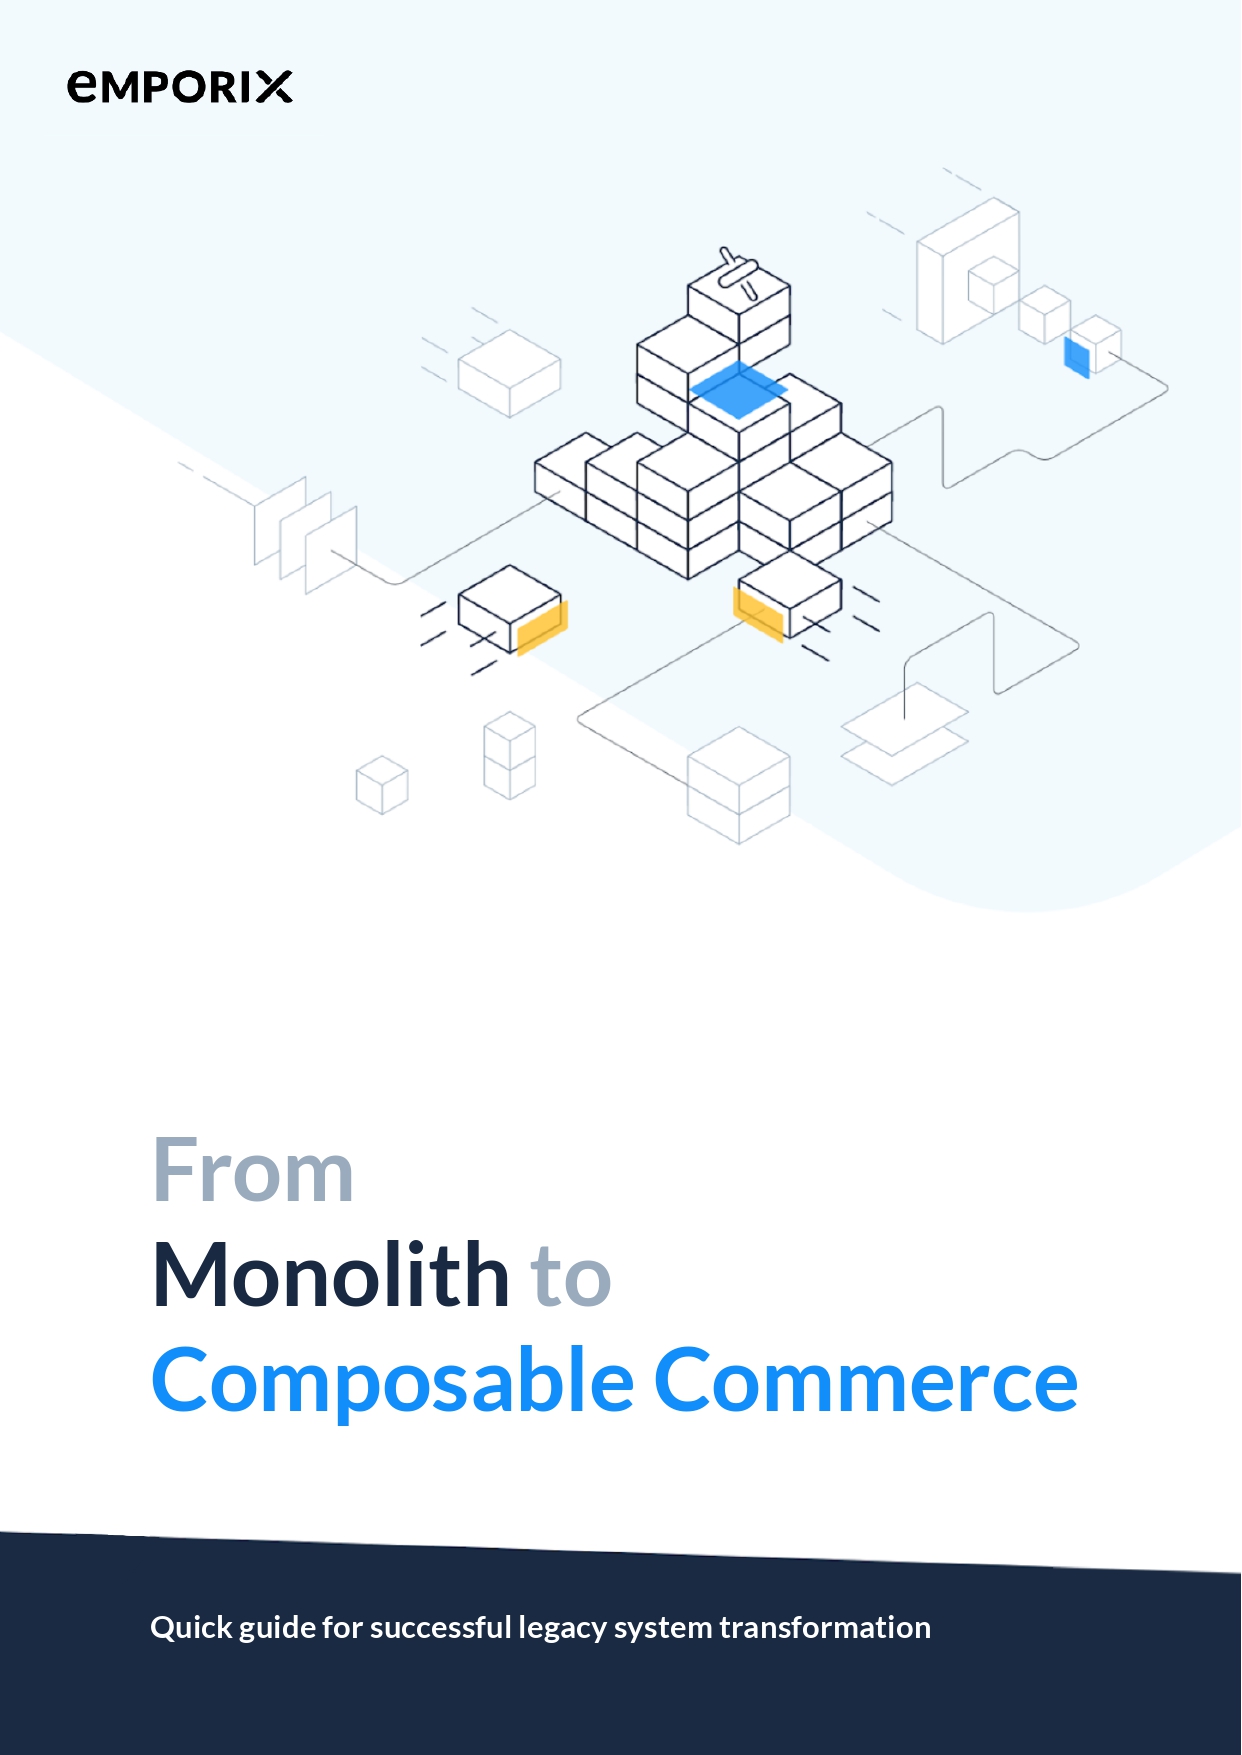 Emporix_Whitepaper_From_Monolith_to_Composable_Commerce-1_page-0001